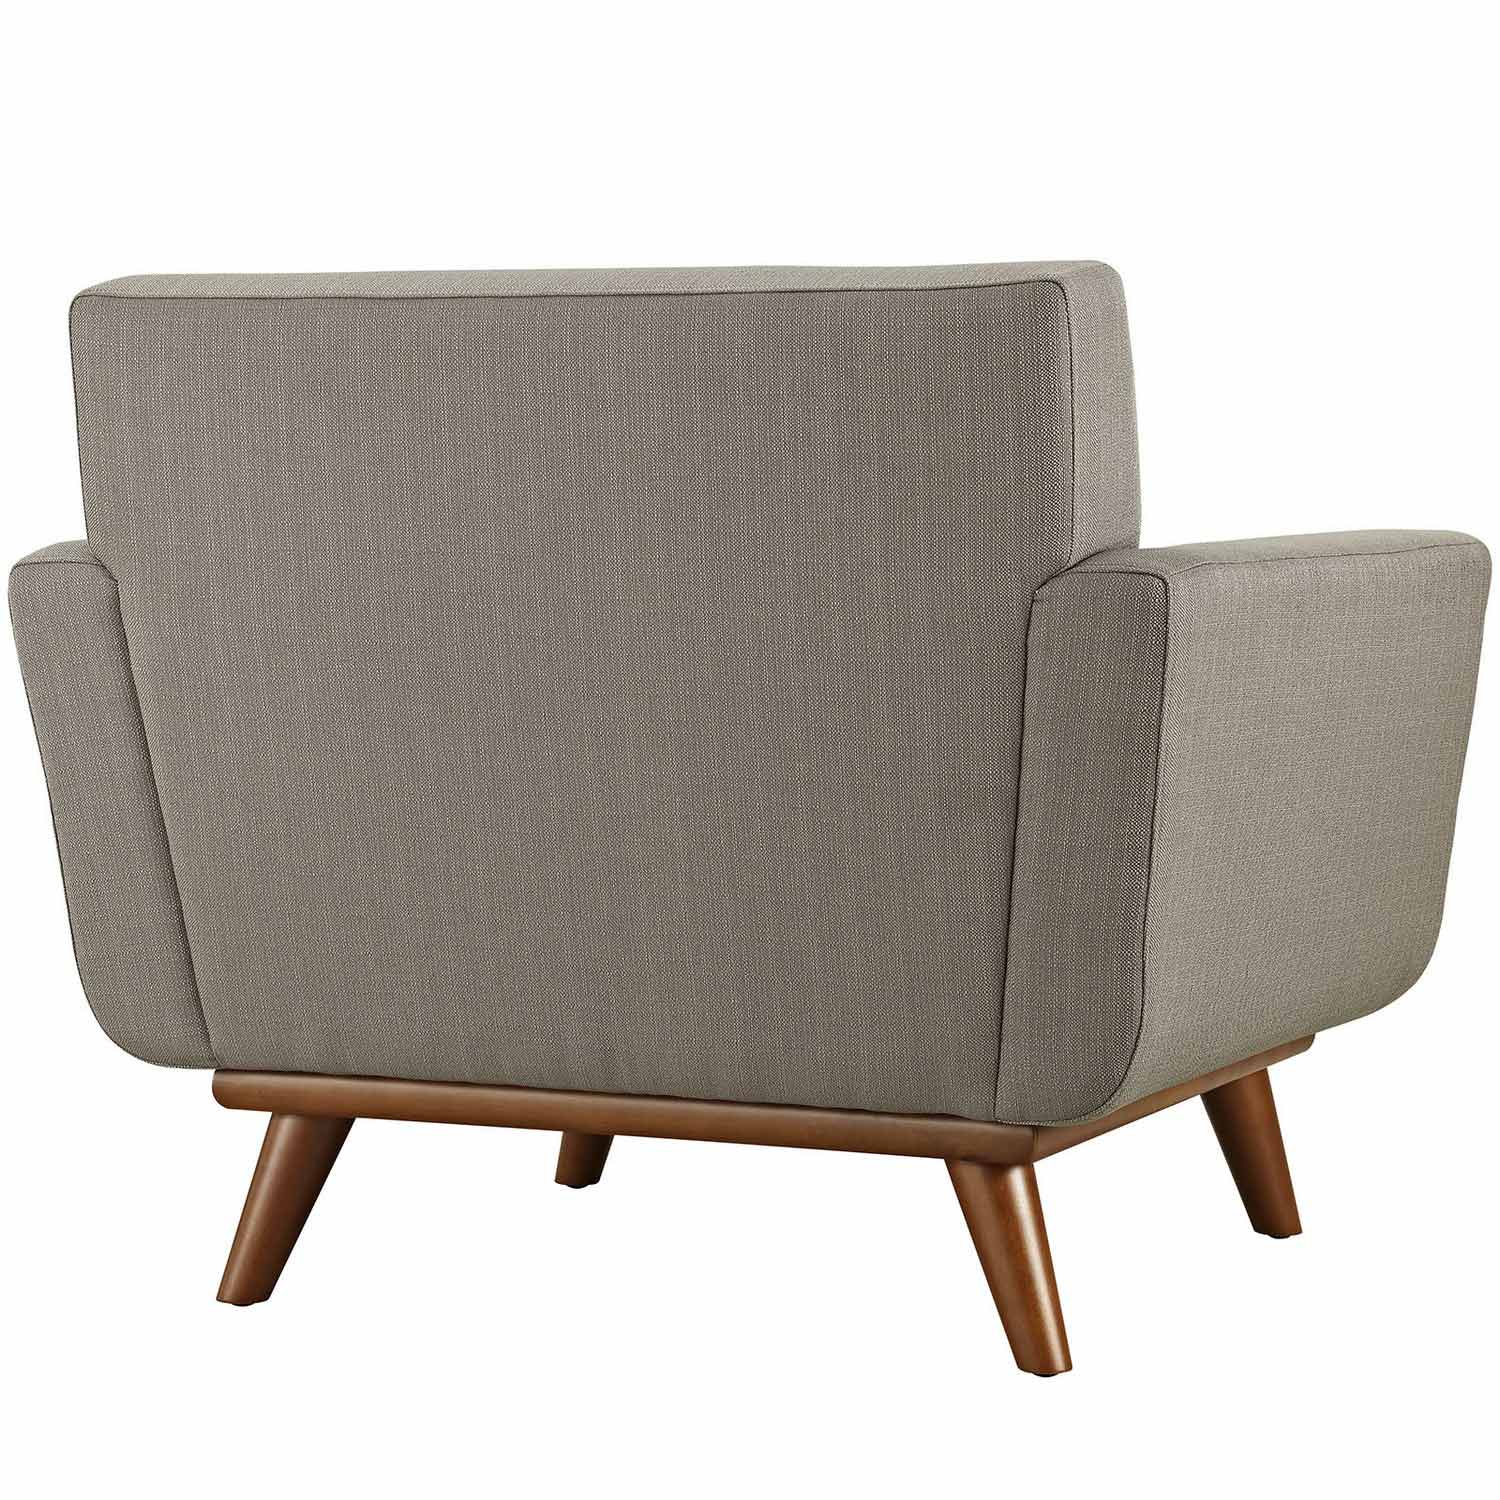 Modway Engage Upholstered Armchair - Granite